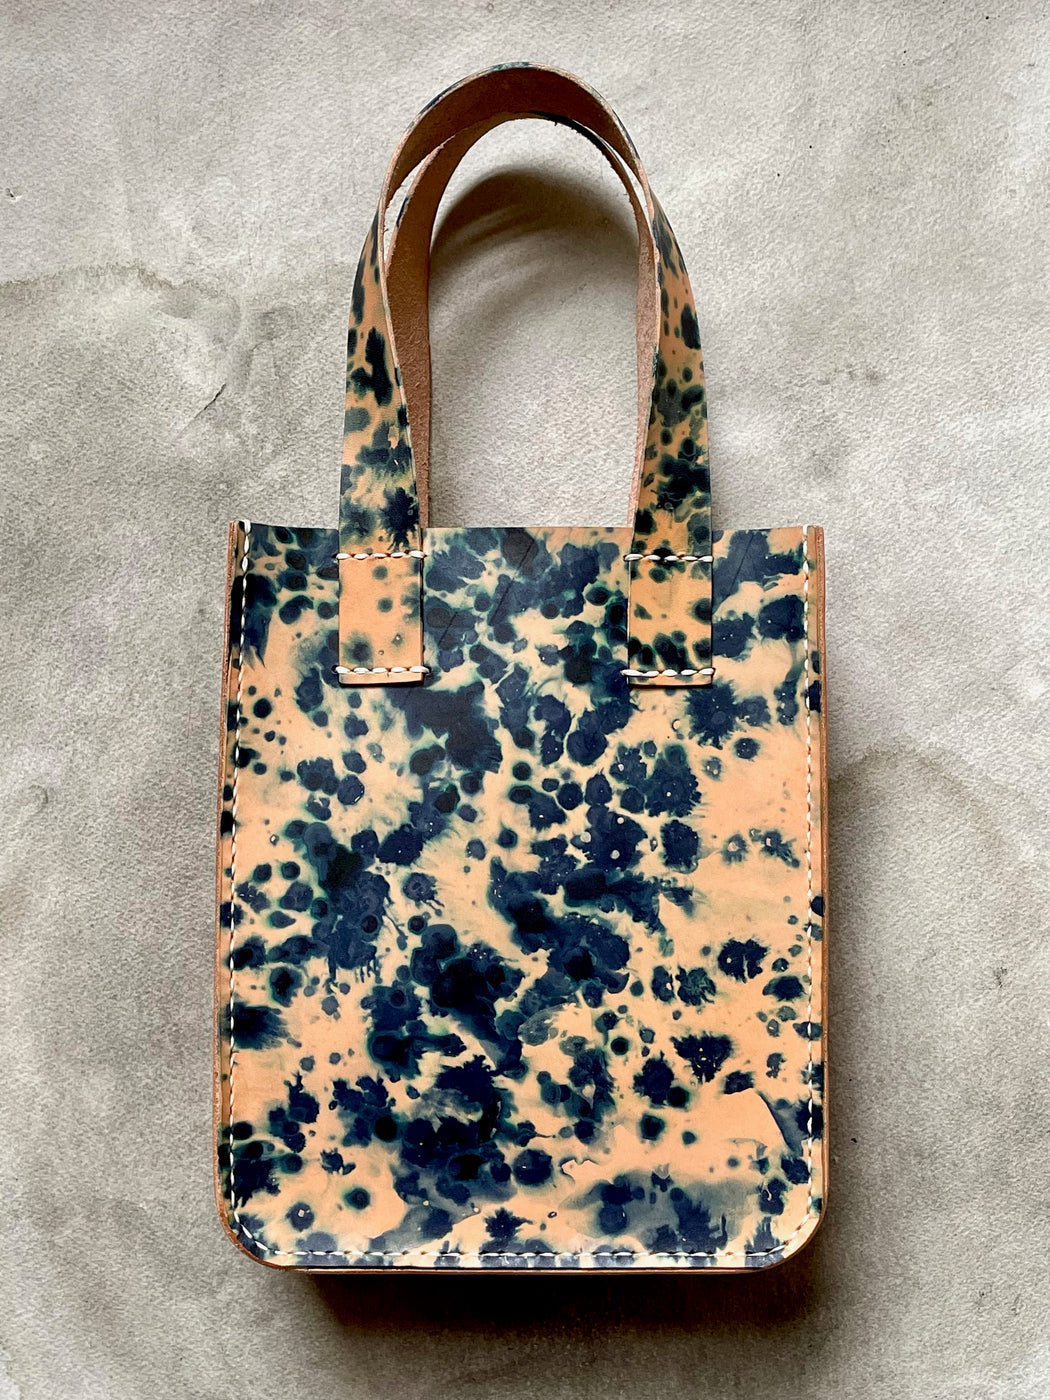 Indigo-Dyed Natural Leather Tote by Made Solid